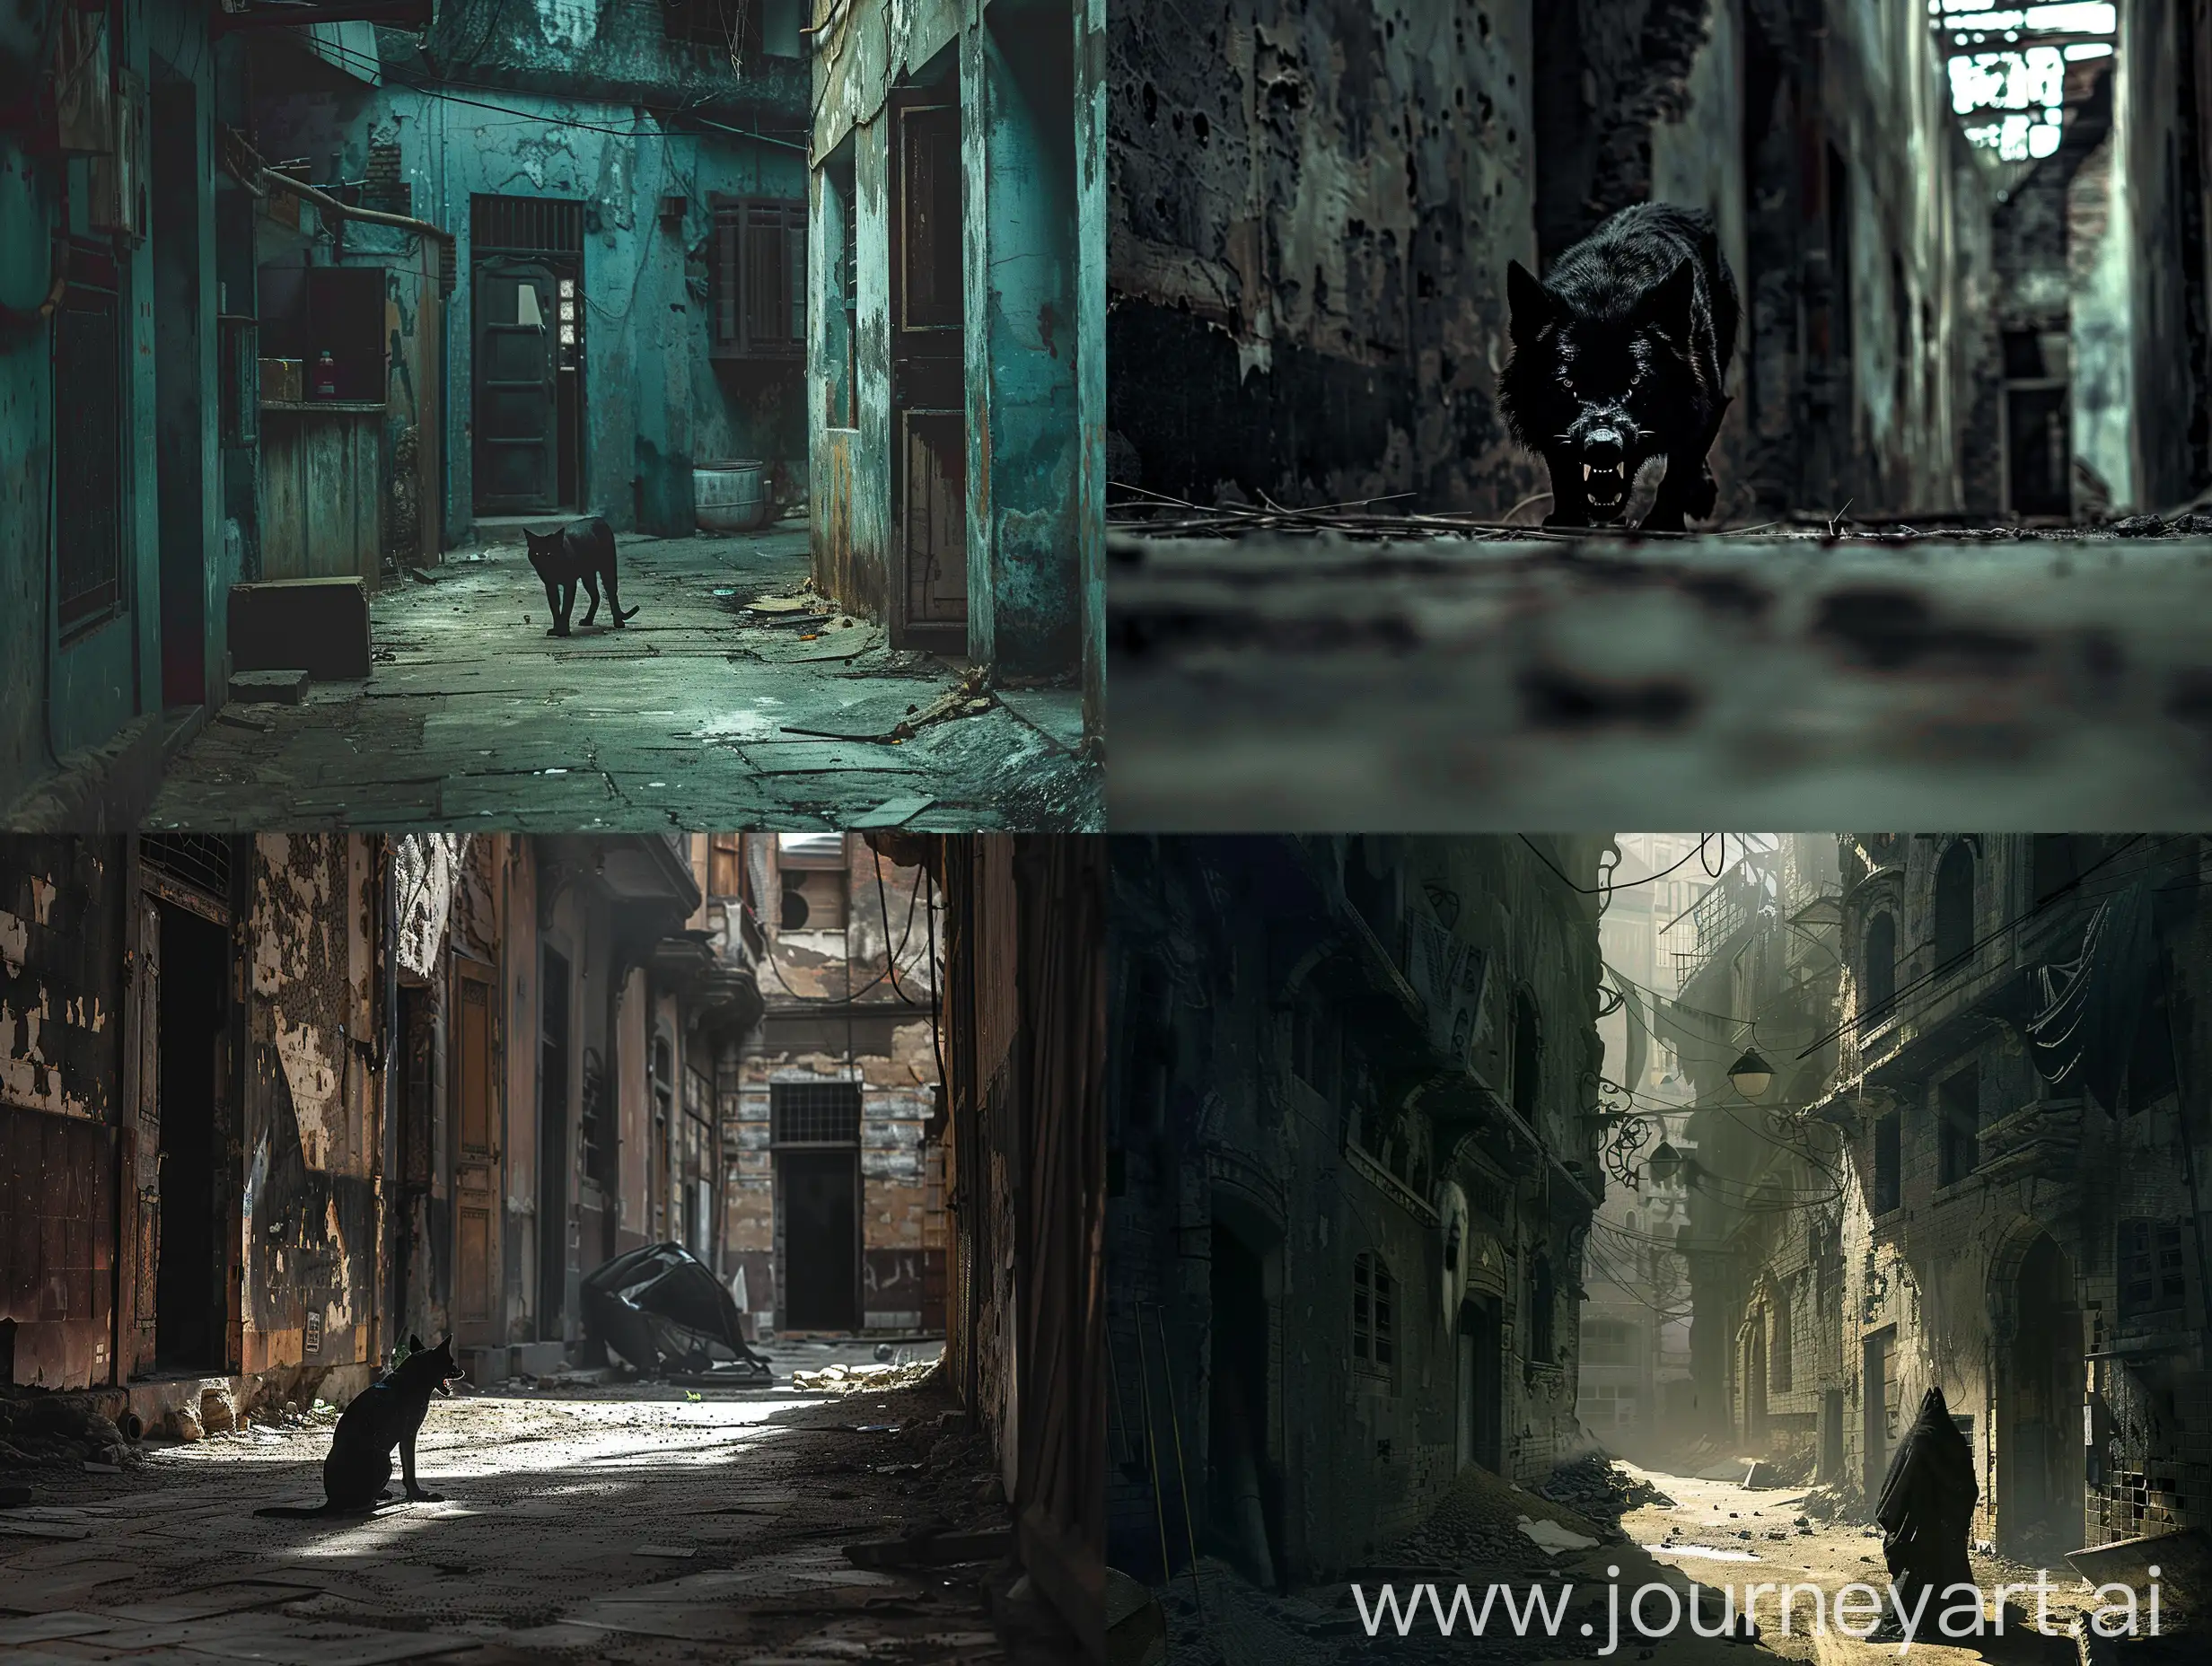  A low growl emerging from the shadows, in an abandoned street of the decaying city